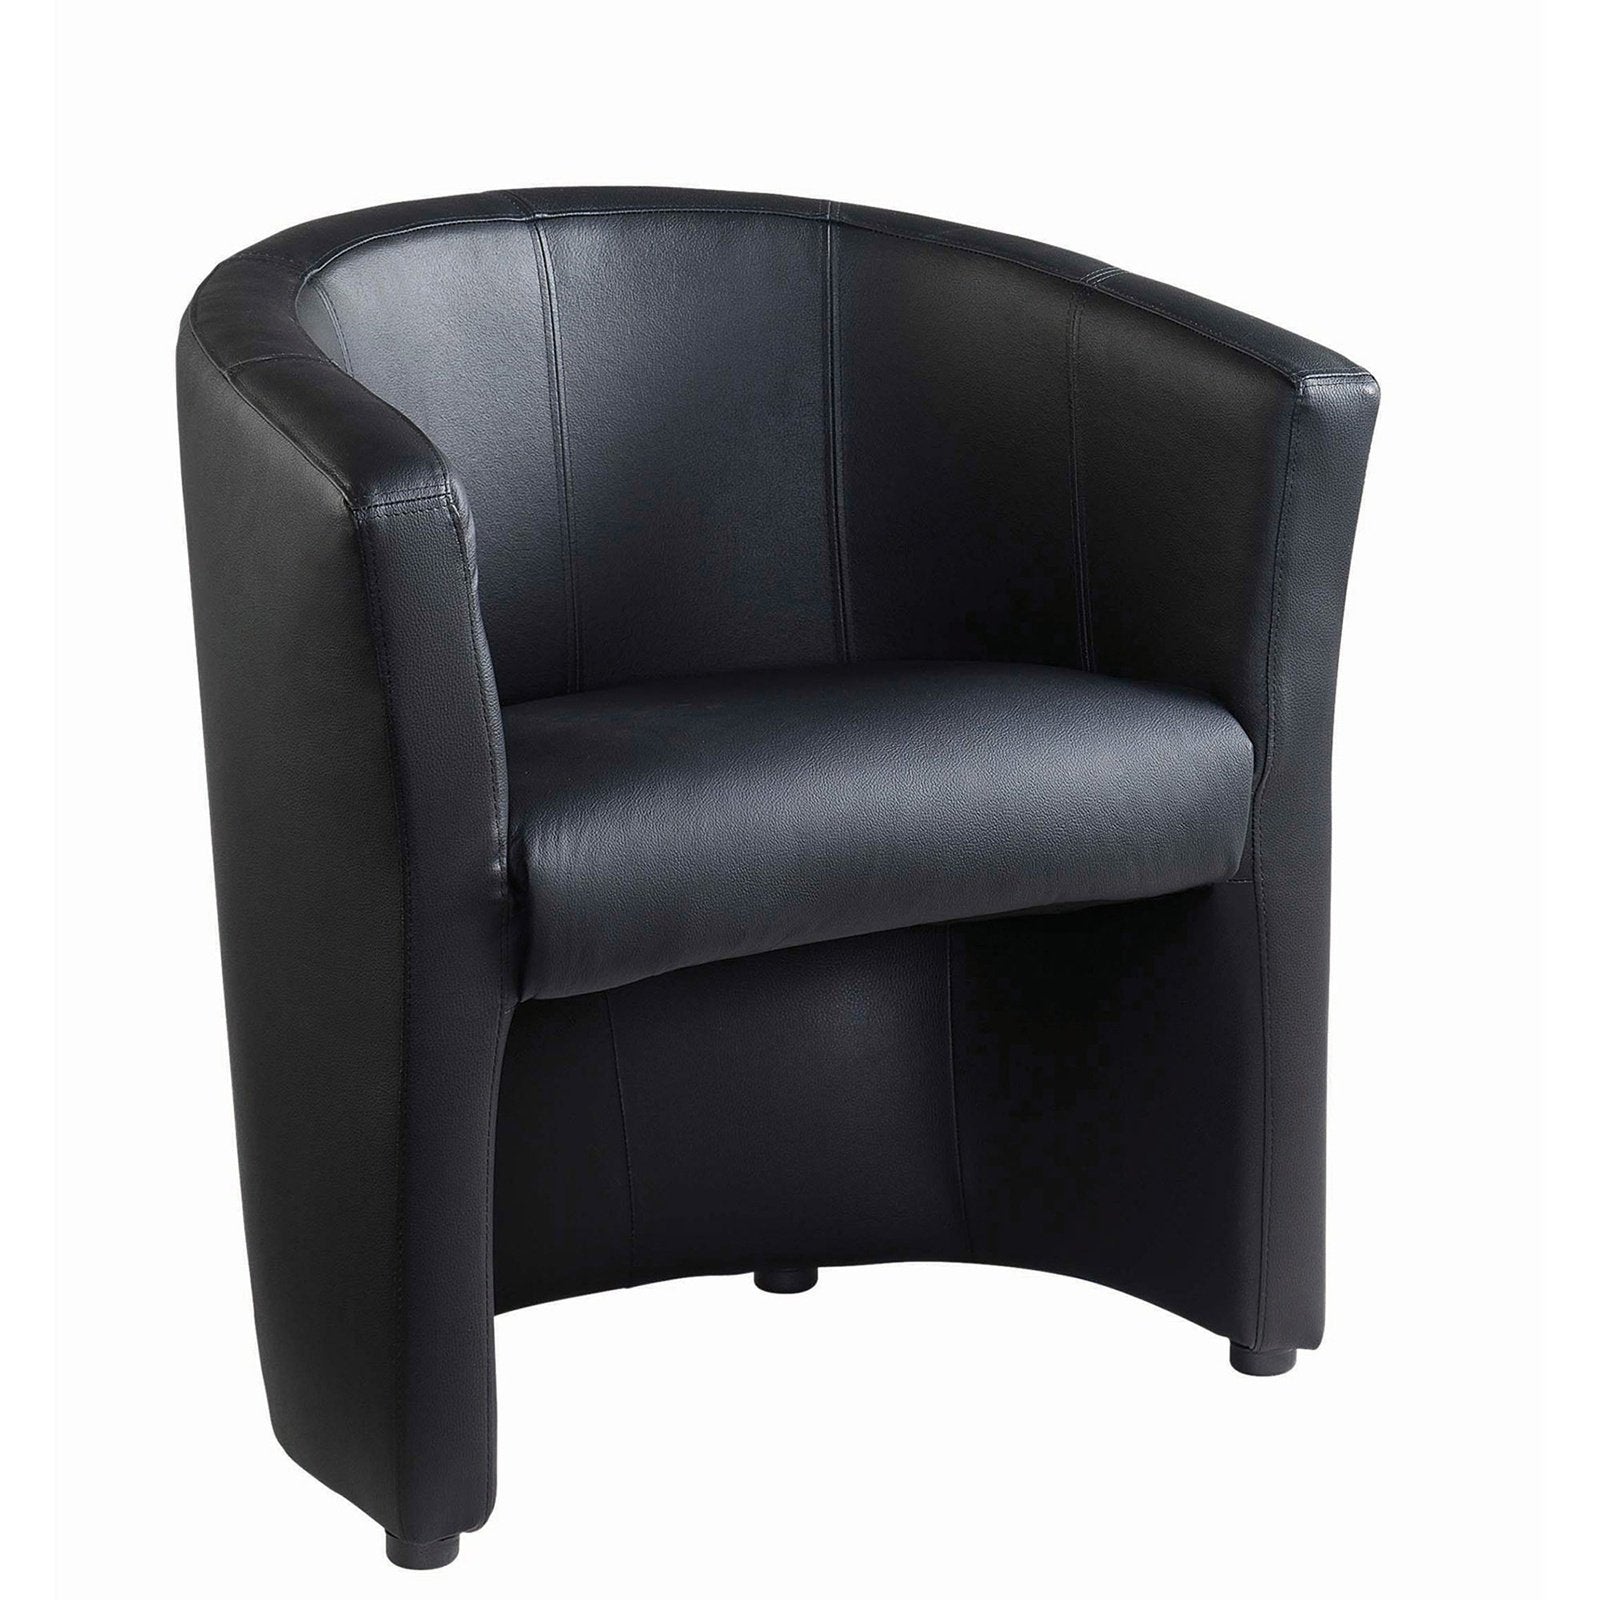 London reception single tub chair 670mm wide - black faux leather - Office Products Online